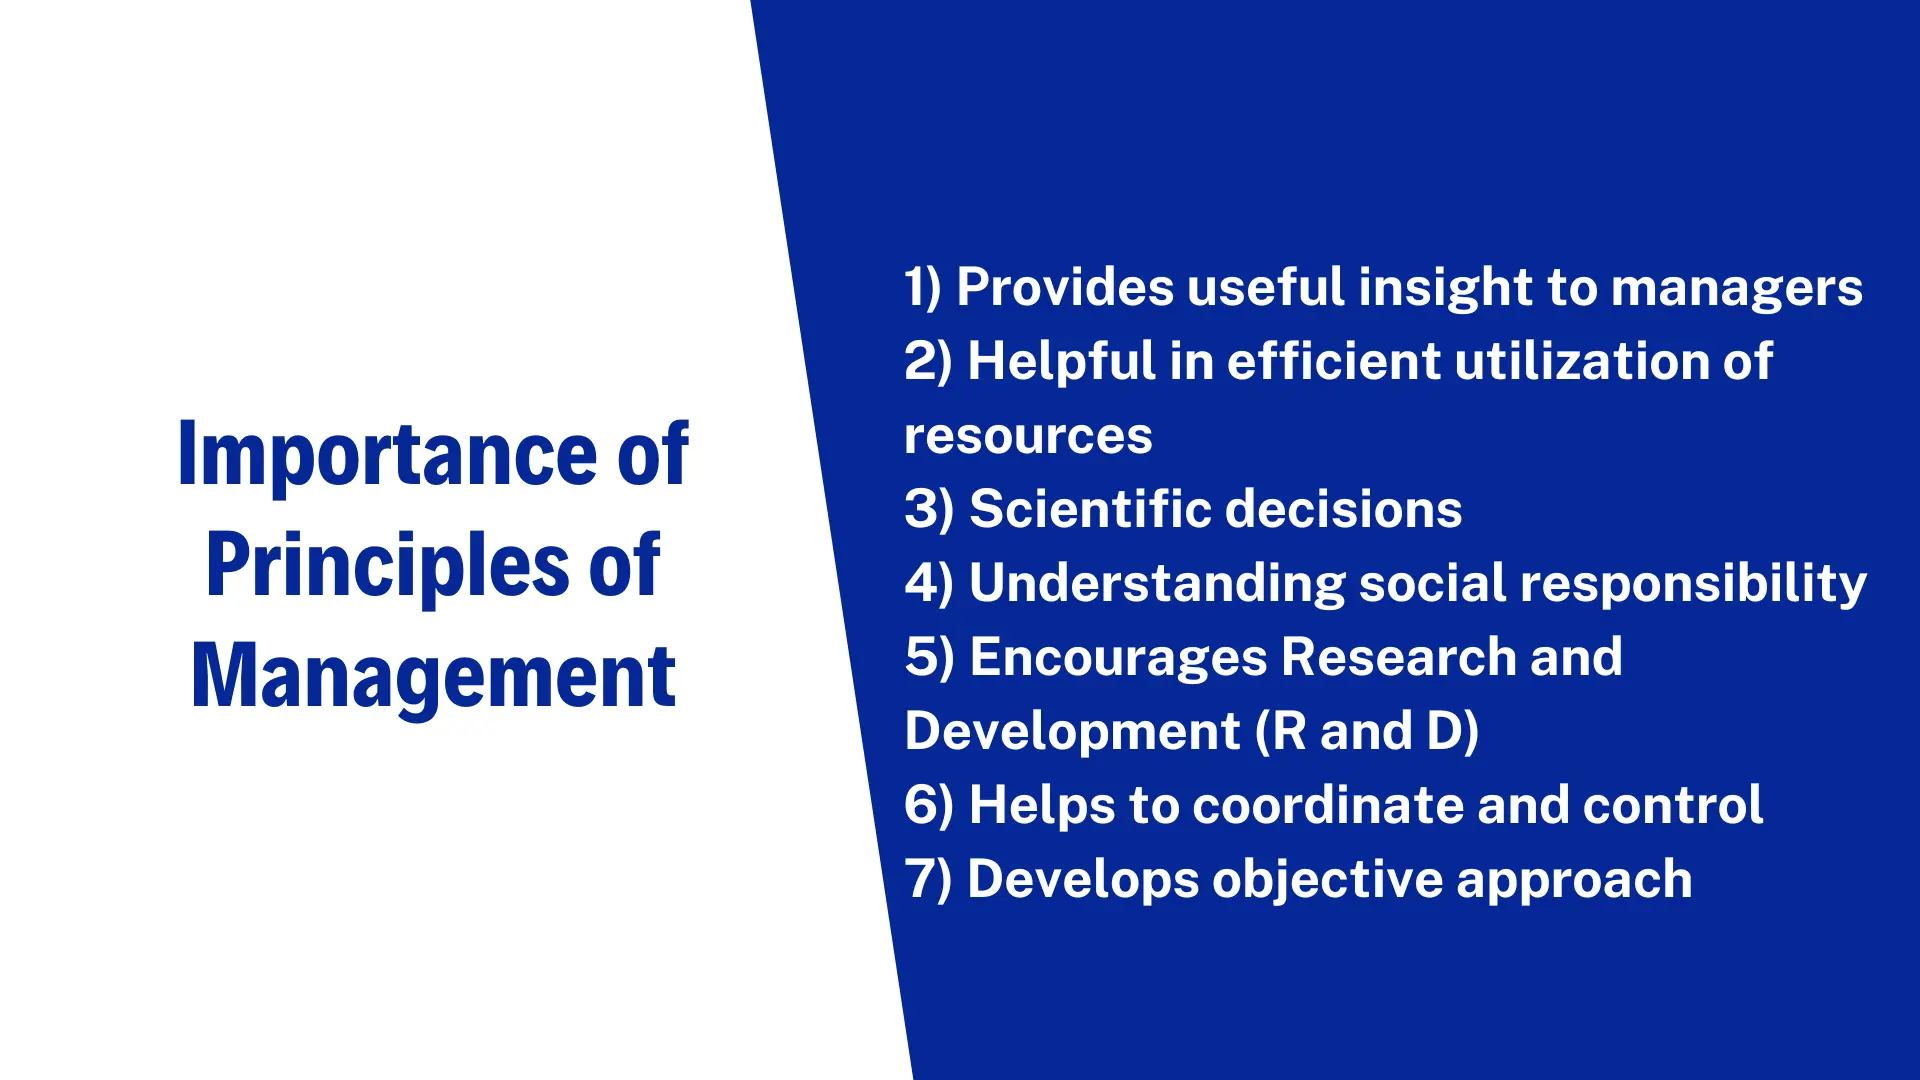 What is the importance of the principles of management?